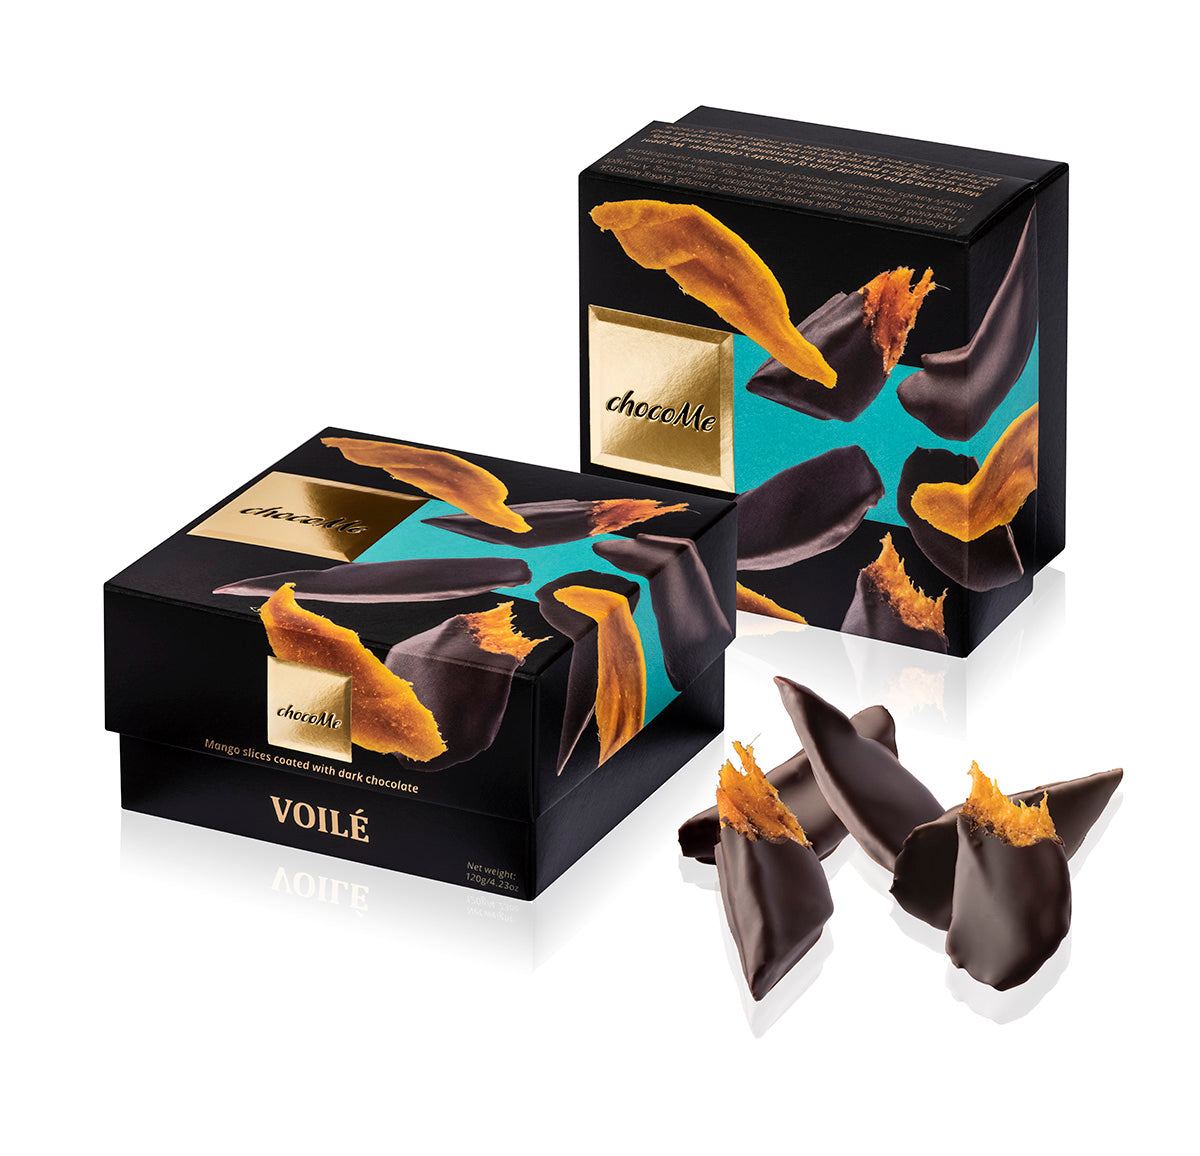 ChocoMe VOILÉ - Mango slices covered in dark chocolate V66% 120g